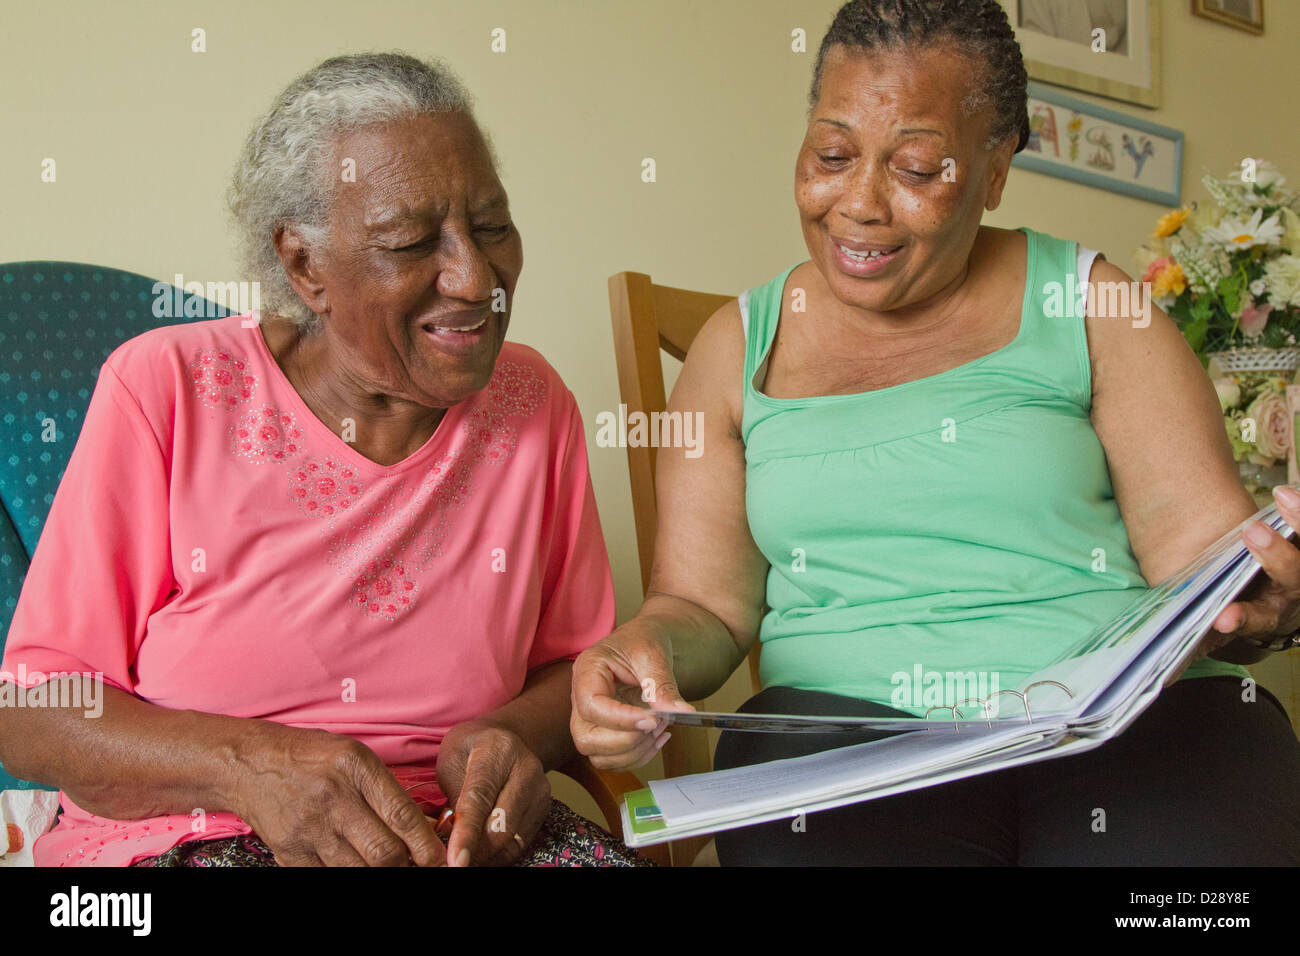 Carer and elderly visually impaired woman looking at photo album Stock Photo